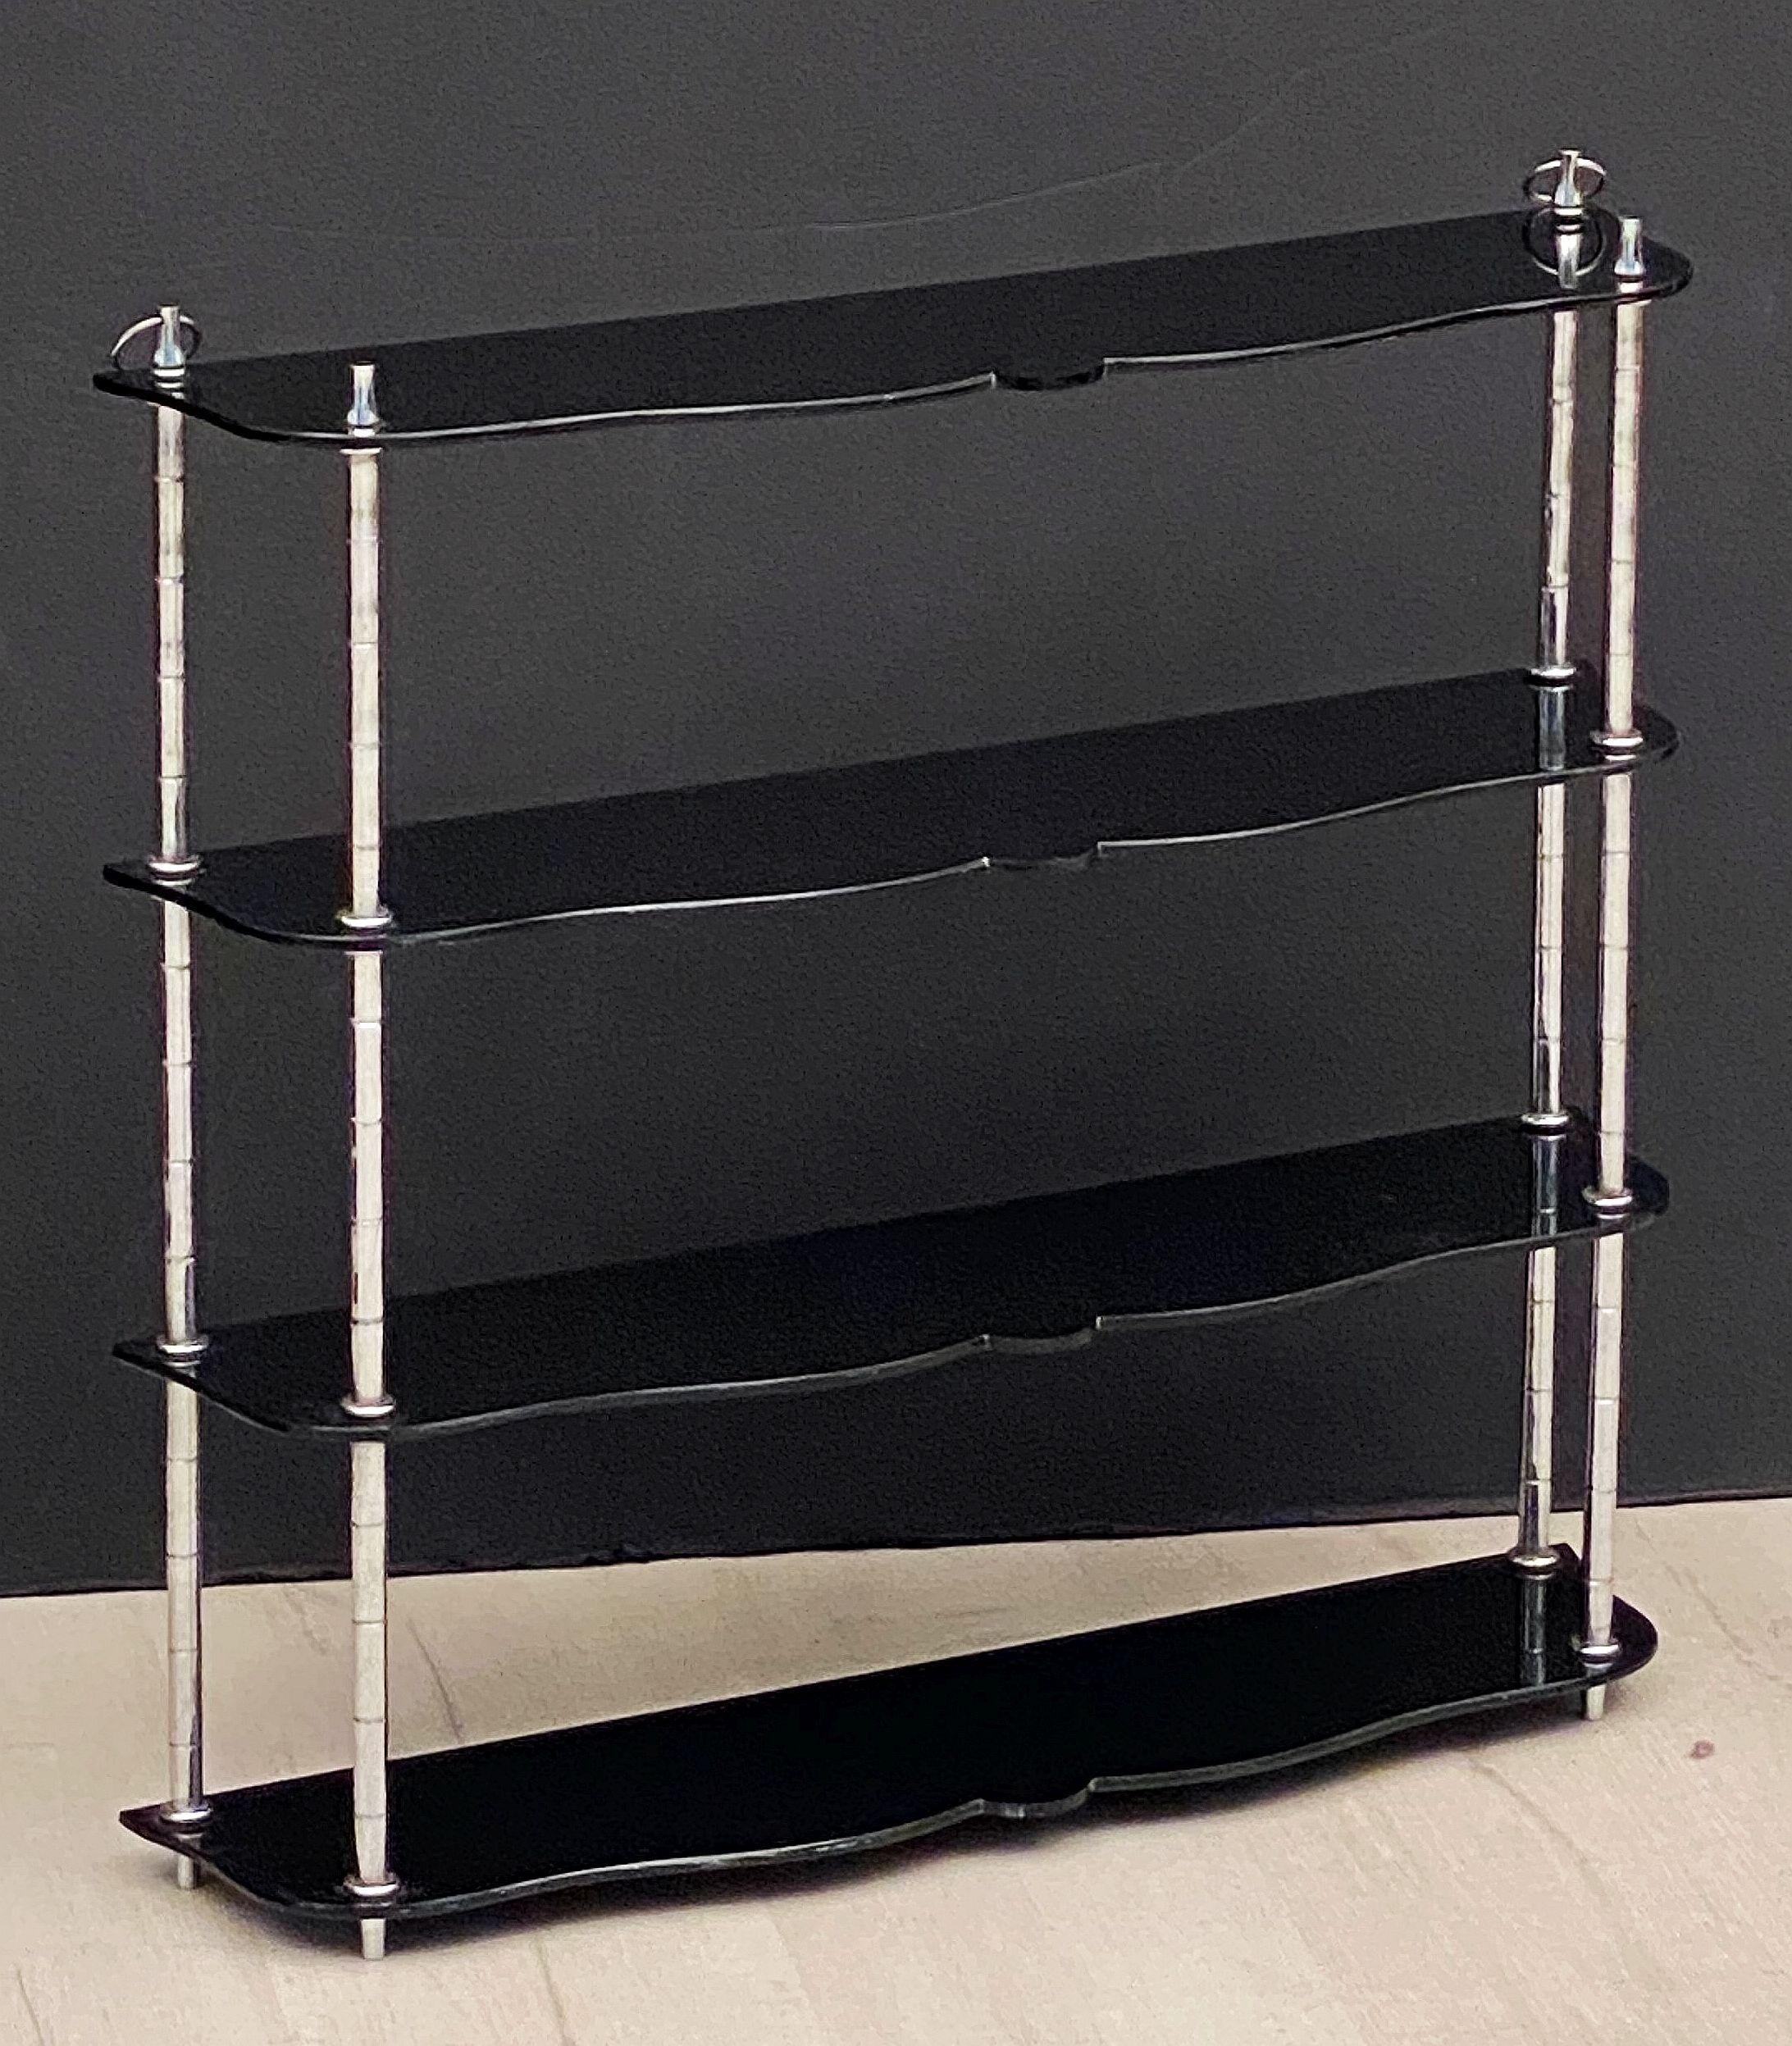 A handsome English hanging curio shelf from the Art Deco era, featuring stylish black Bakelite shelves and chrome supports.